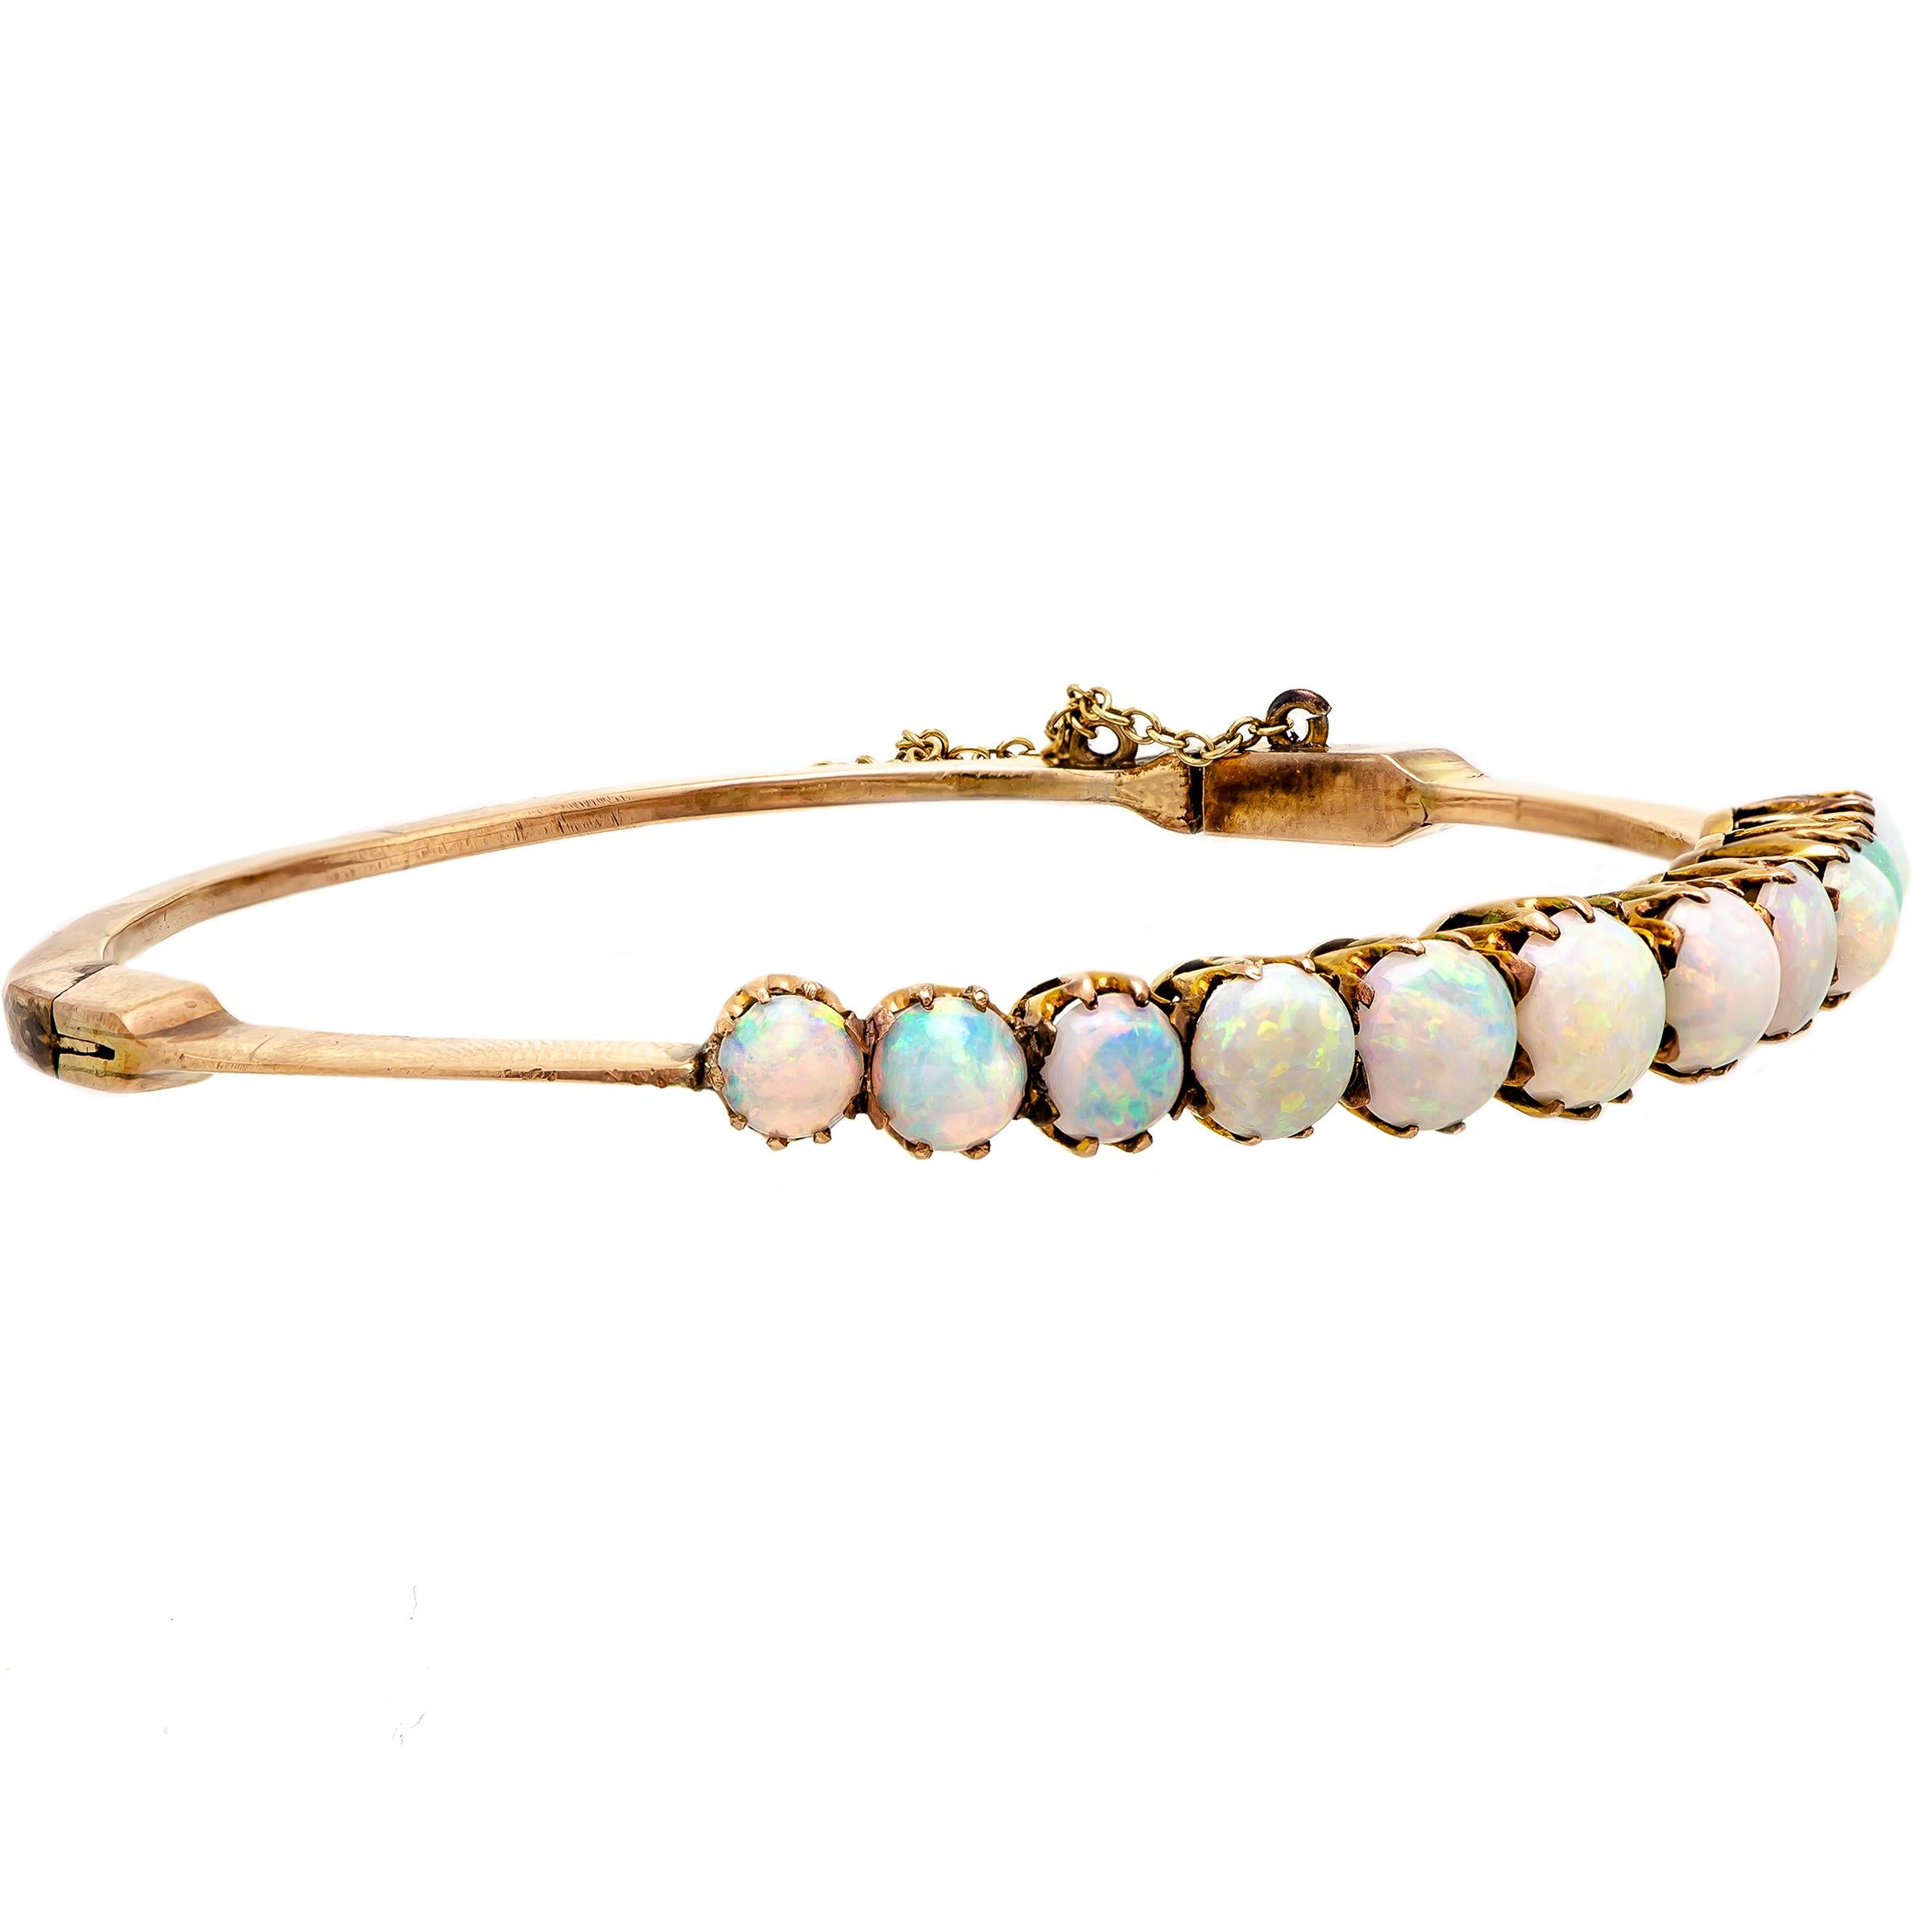 An exquisite antique circa 1900 opal and yellow gold stiff-hinged, half hoop bangle bracelet. Set with 11 round, vibrant graduating opals ranging in size from approximately 5.5 mm to 7.5 mm. These opals are prong set into basket mountings. This